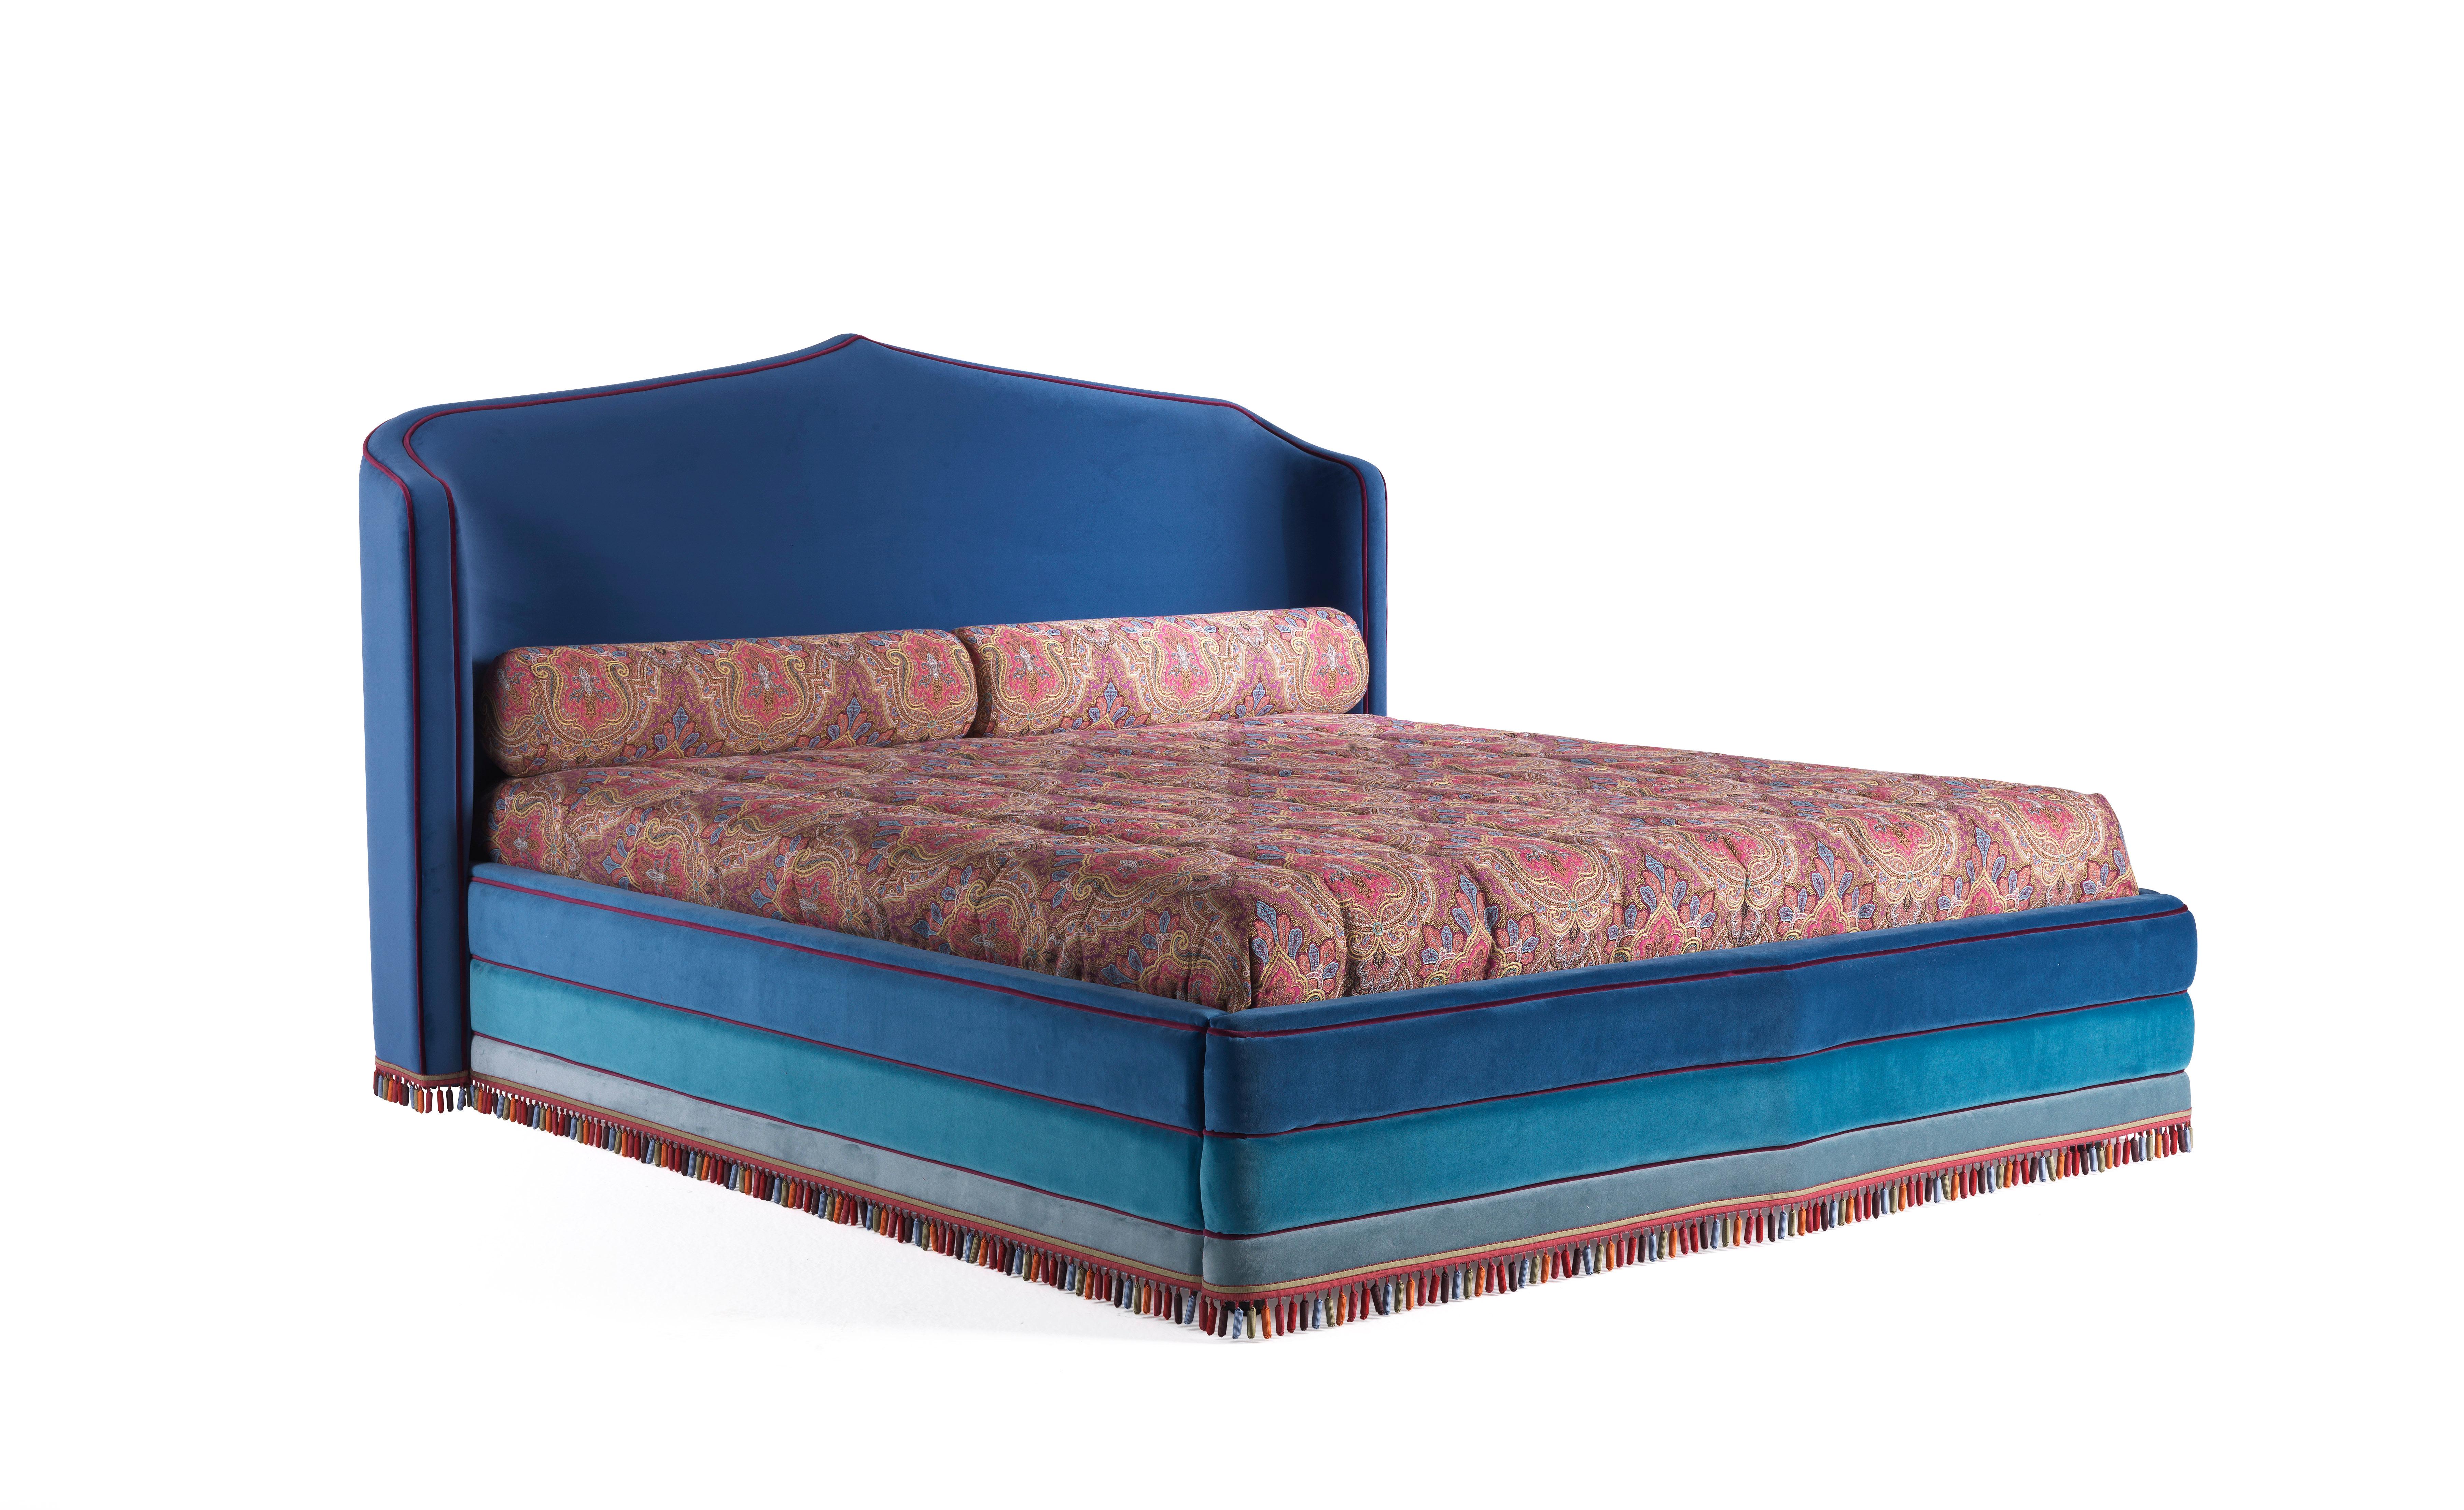 A fairy-tale bed inspired by a ‘thousand-and-one-nights’ imagery. The arabesque shape of the headboard, the intense turquoise color with purple piping and the precious and the multicolor passementerie contribute to creating a magical and